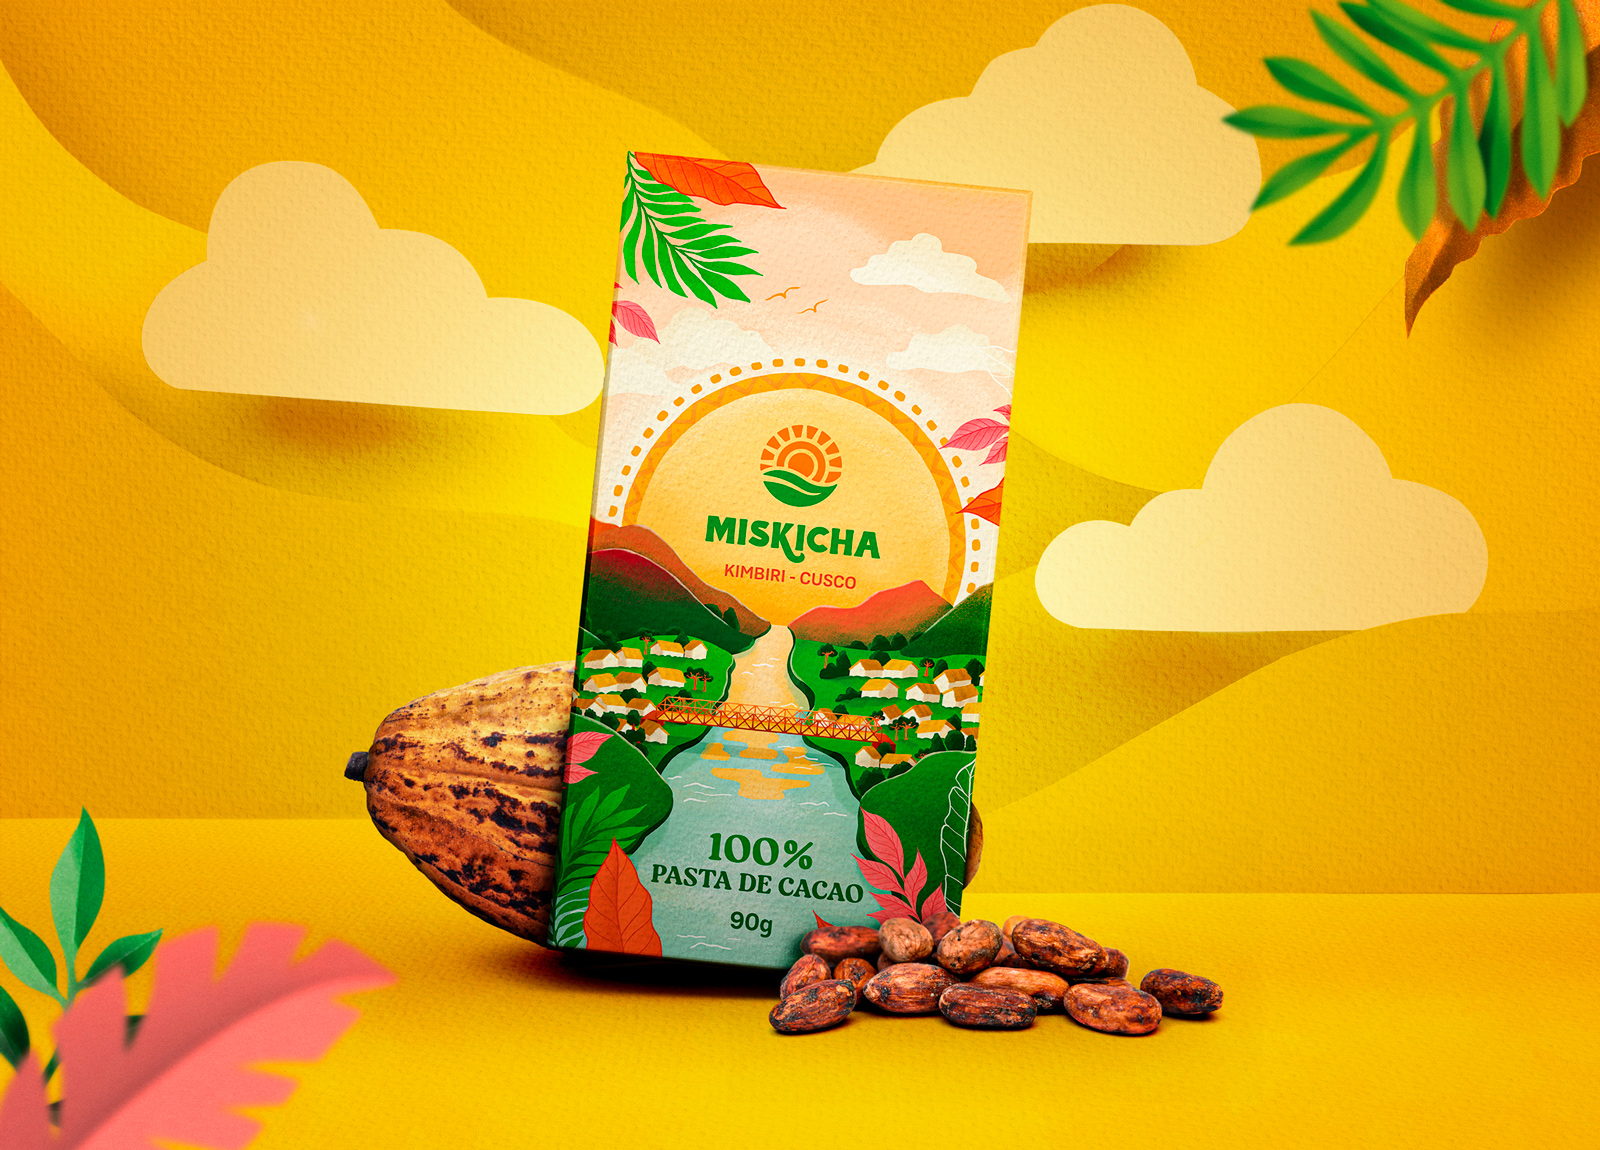 Miskicha Chocolate Packaging Design That Celebrates the Vibrant Cultures and Rich Biodiversity of Peru